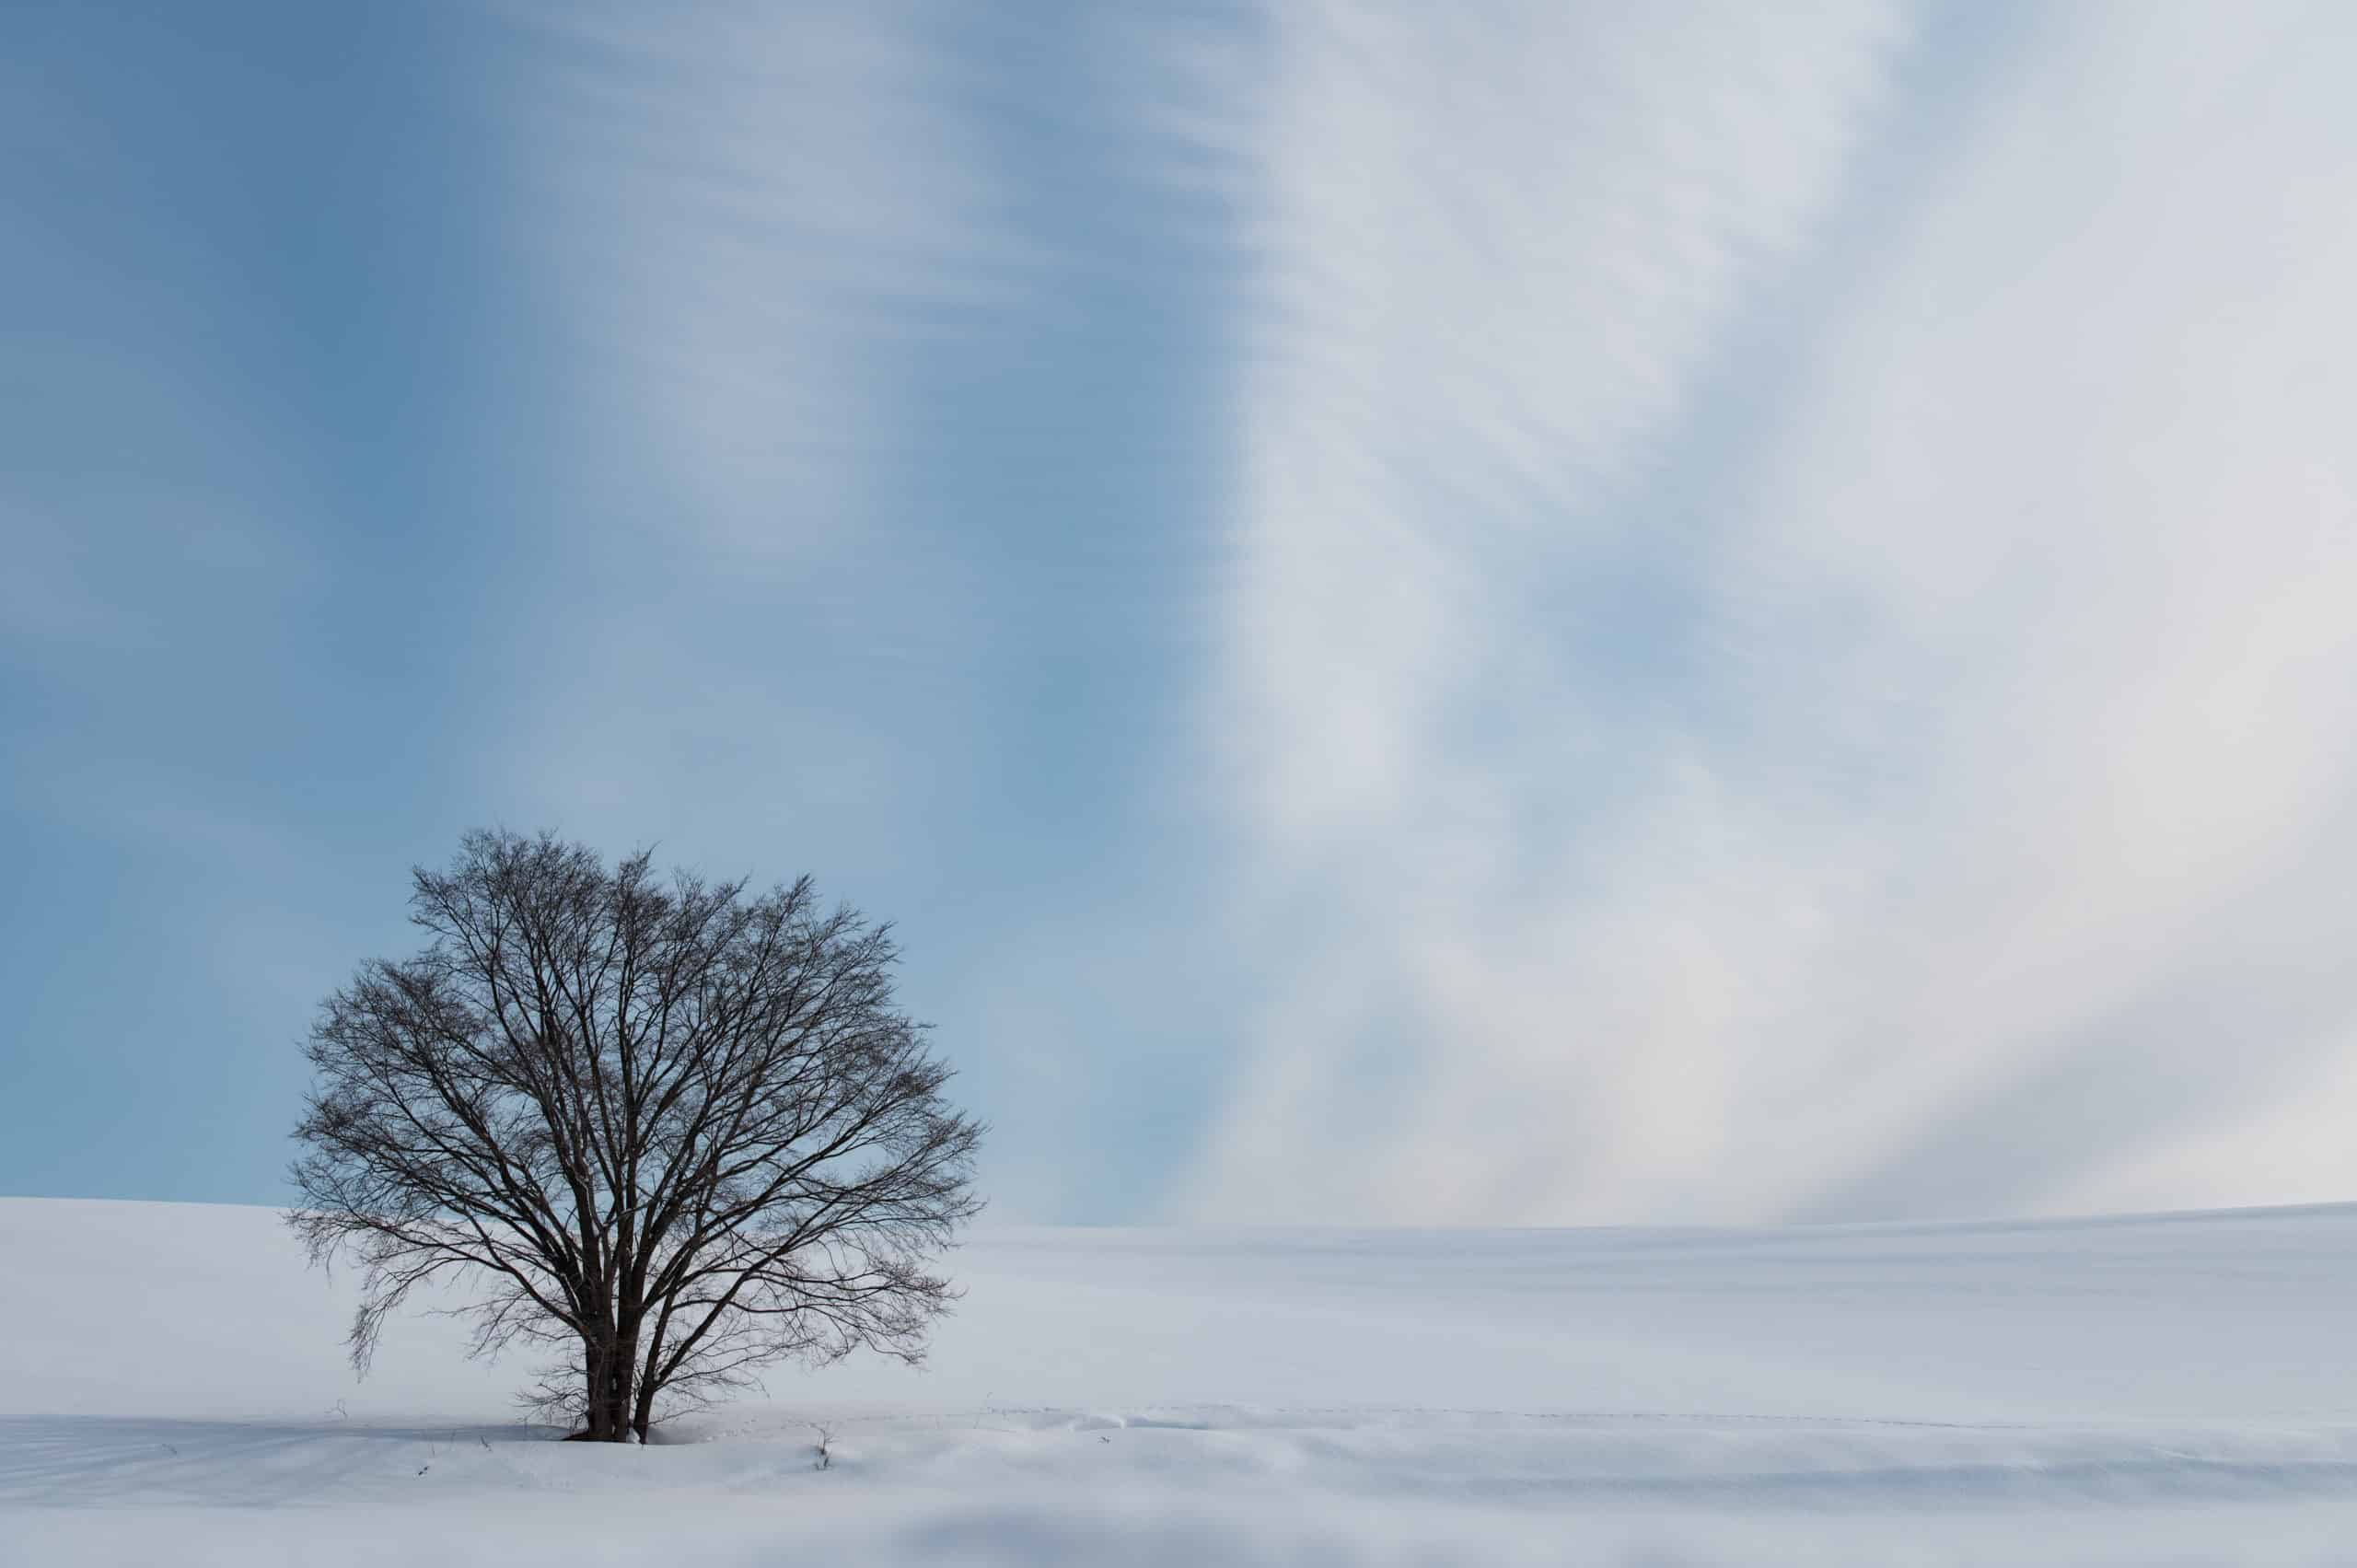 Beautiful tree in the middle of snowy mountain